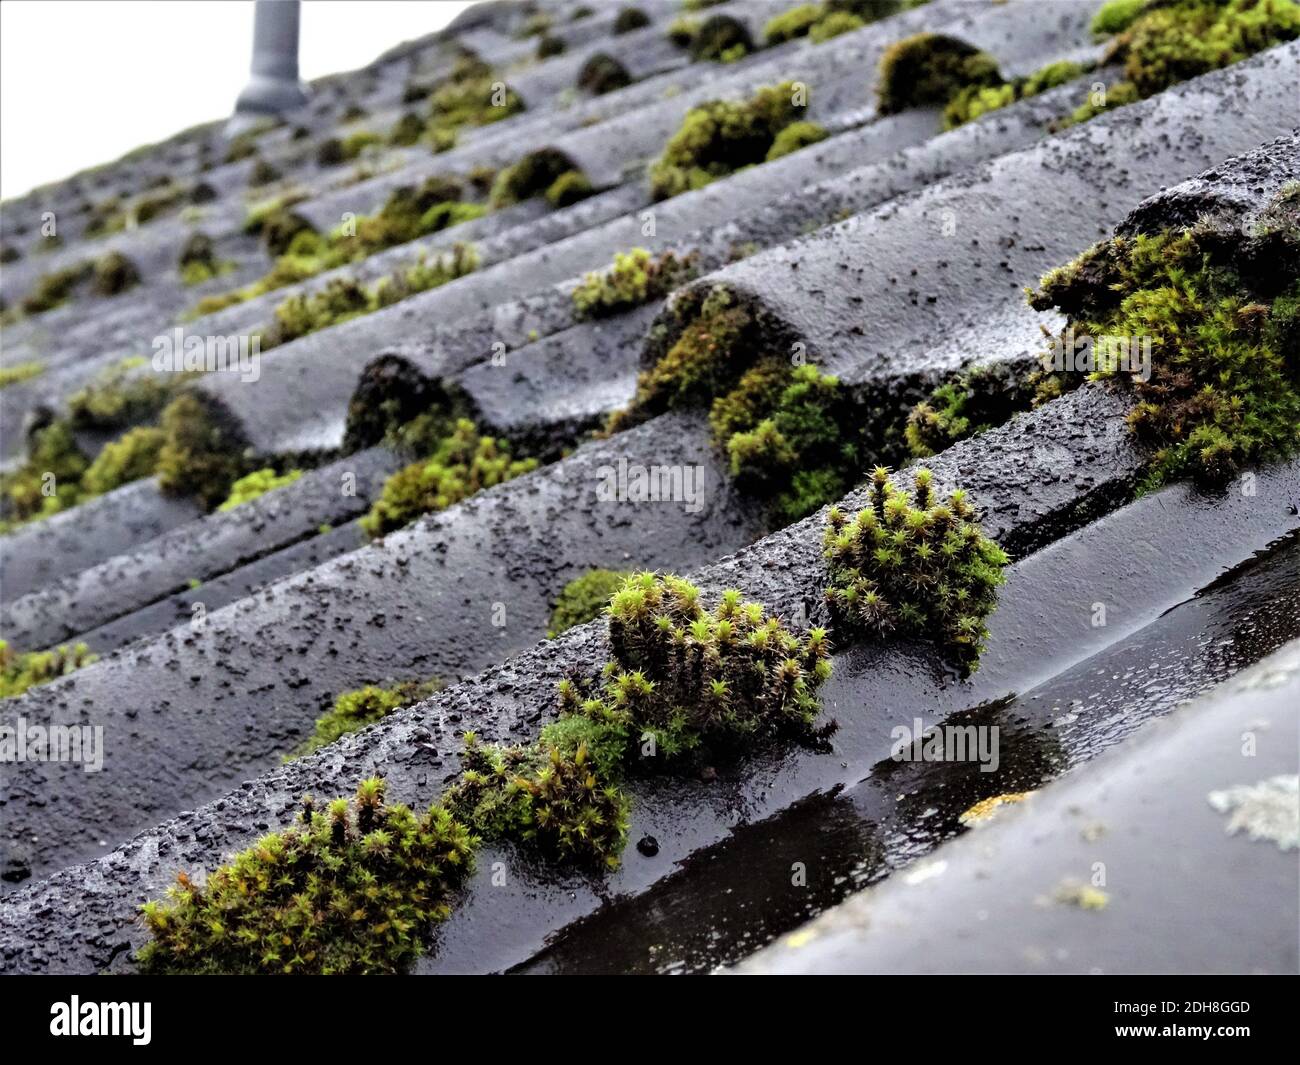 A closeup of Orthotrichum Speciosum covering the roof Stock Photo